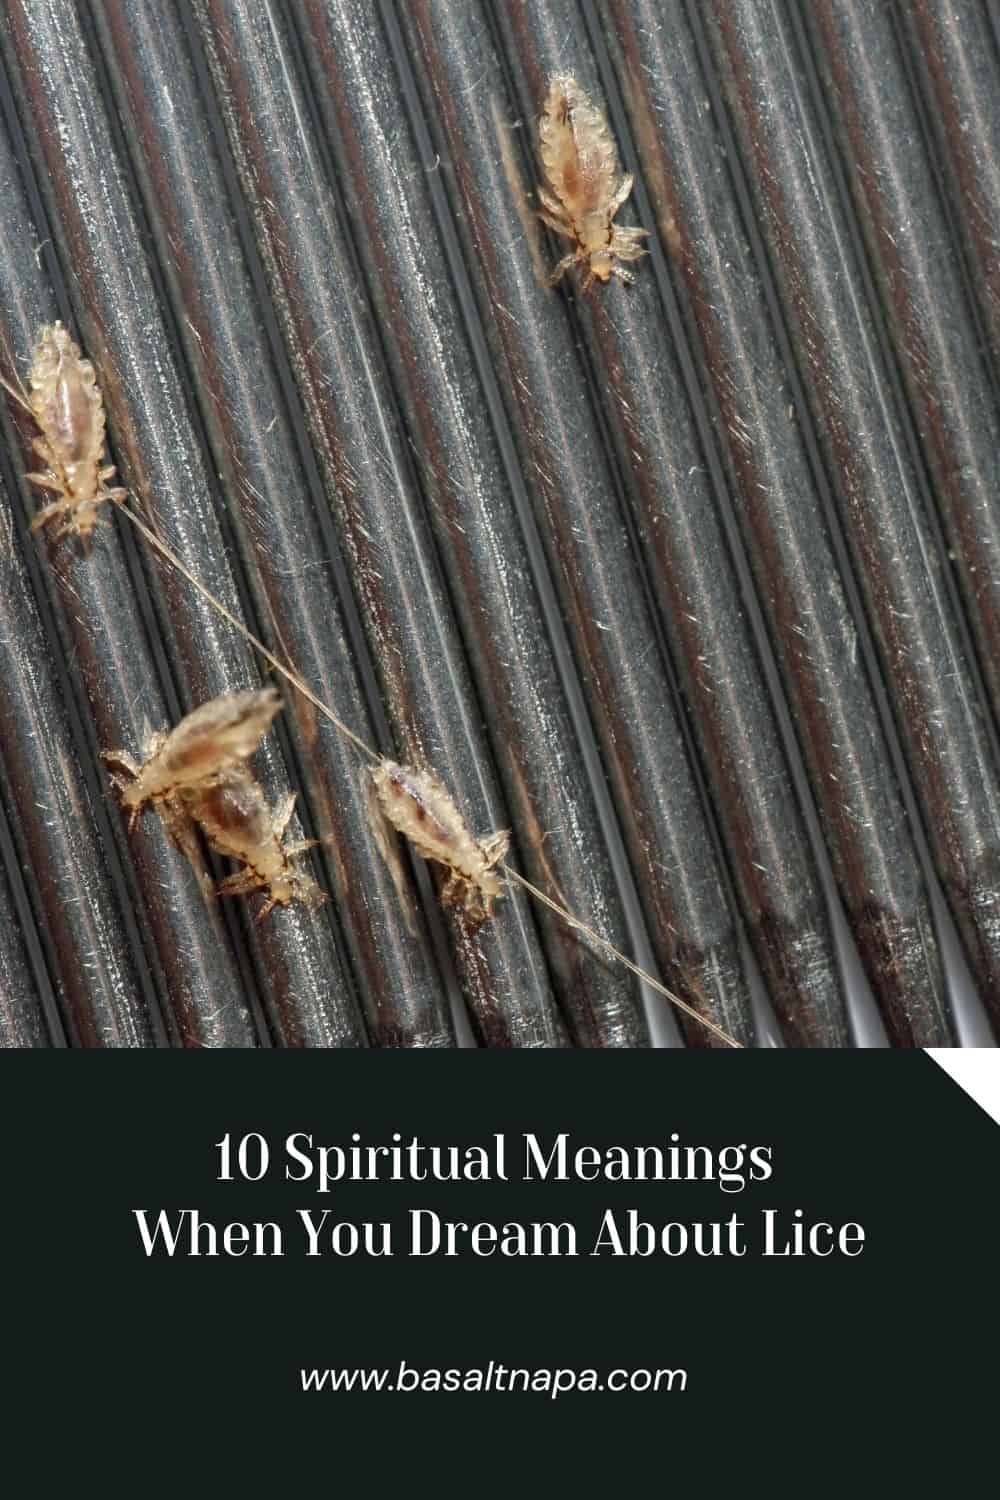 10 Spiritual Meanings When You Dream About Lice